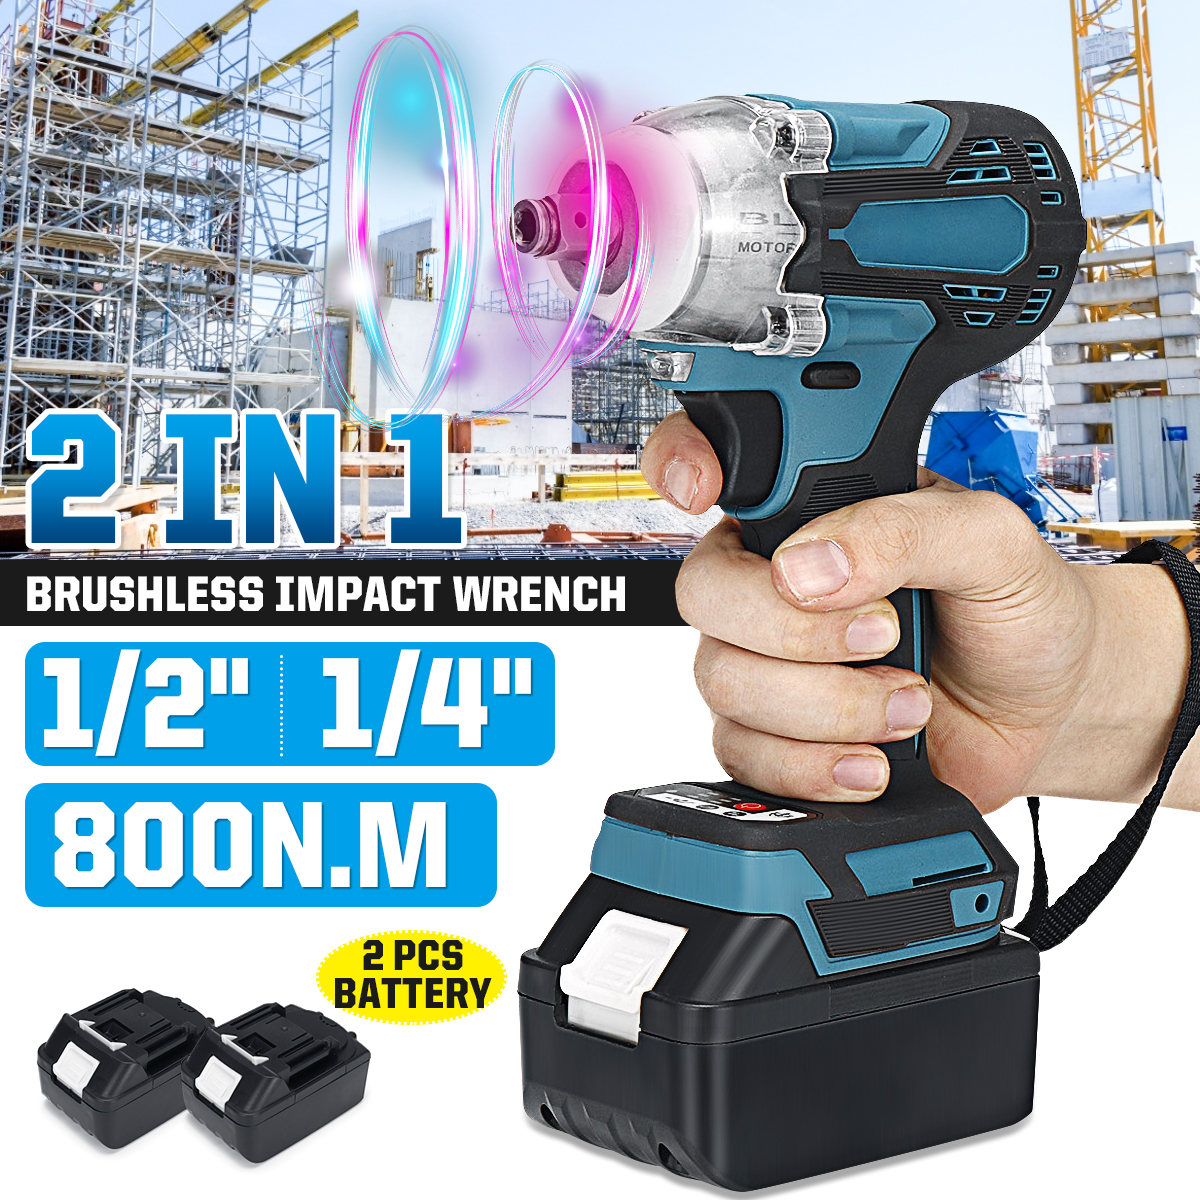 Drillpro-2-in1-18V-800Nm-Electric-Wrench-Screwdriver-Brushless-Cordless-Electric-12Wrench-14Screwdri-1806148-1